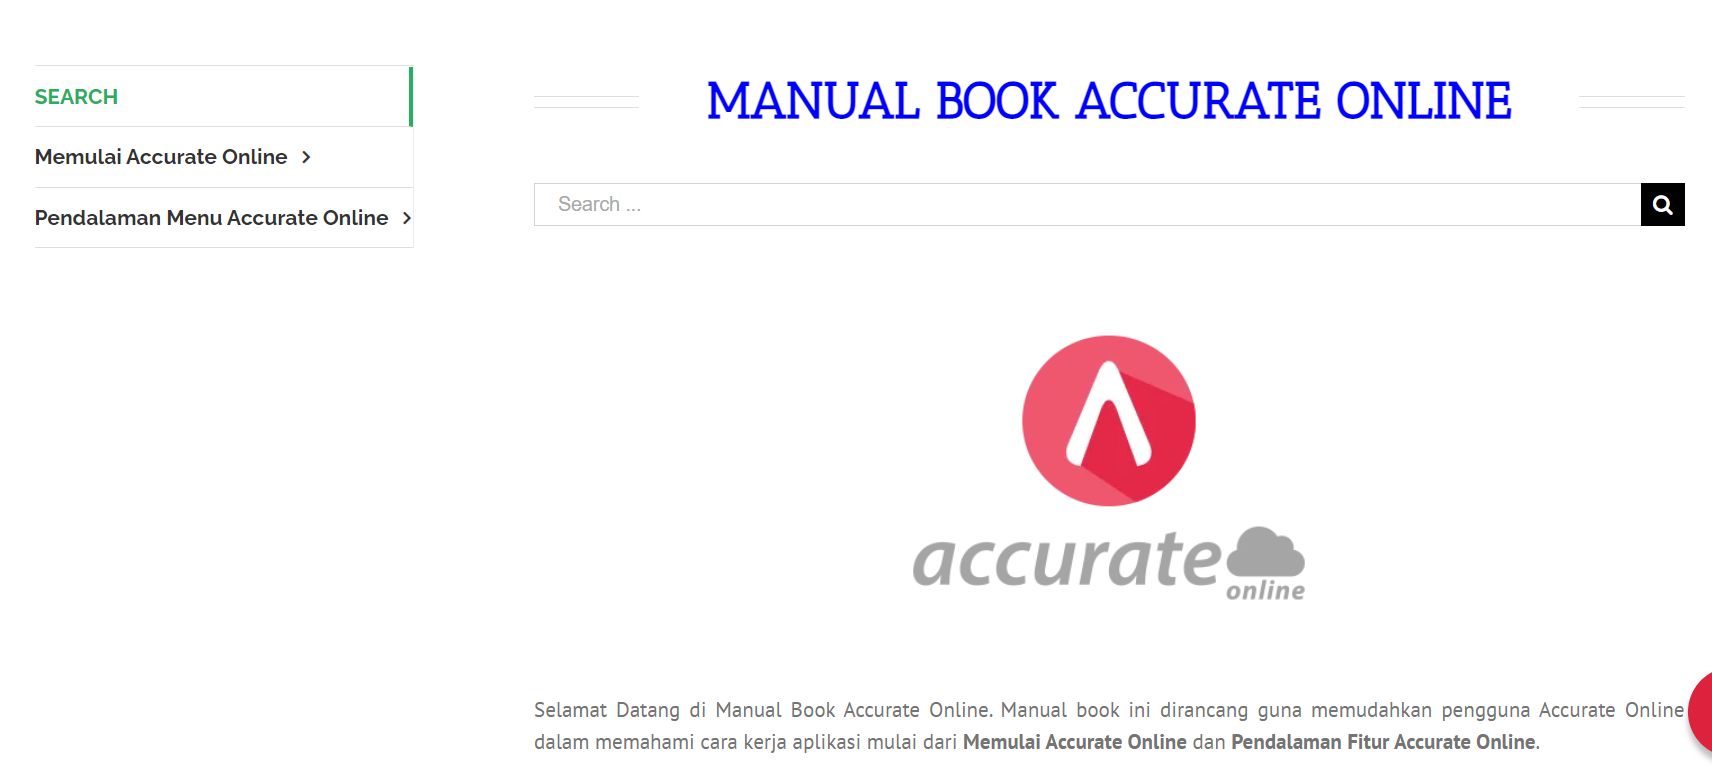 manual book accurate online